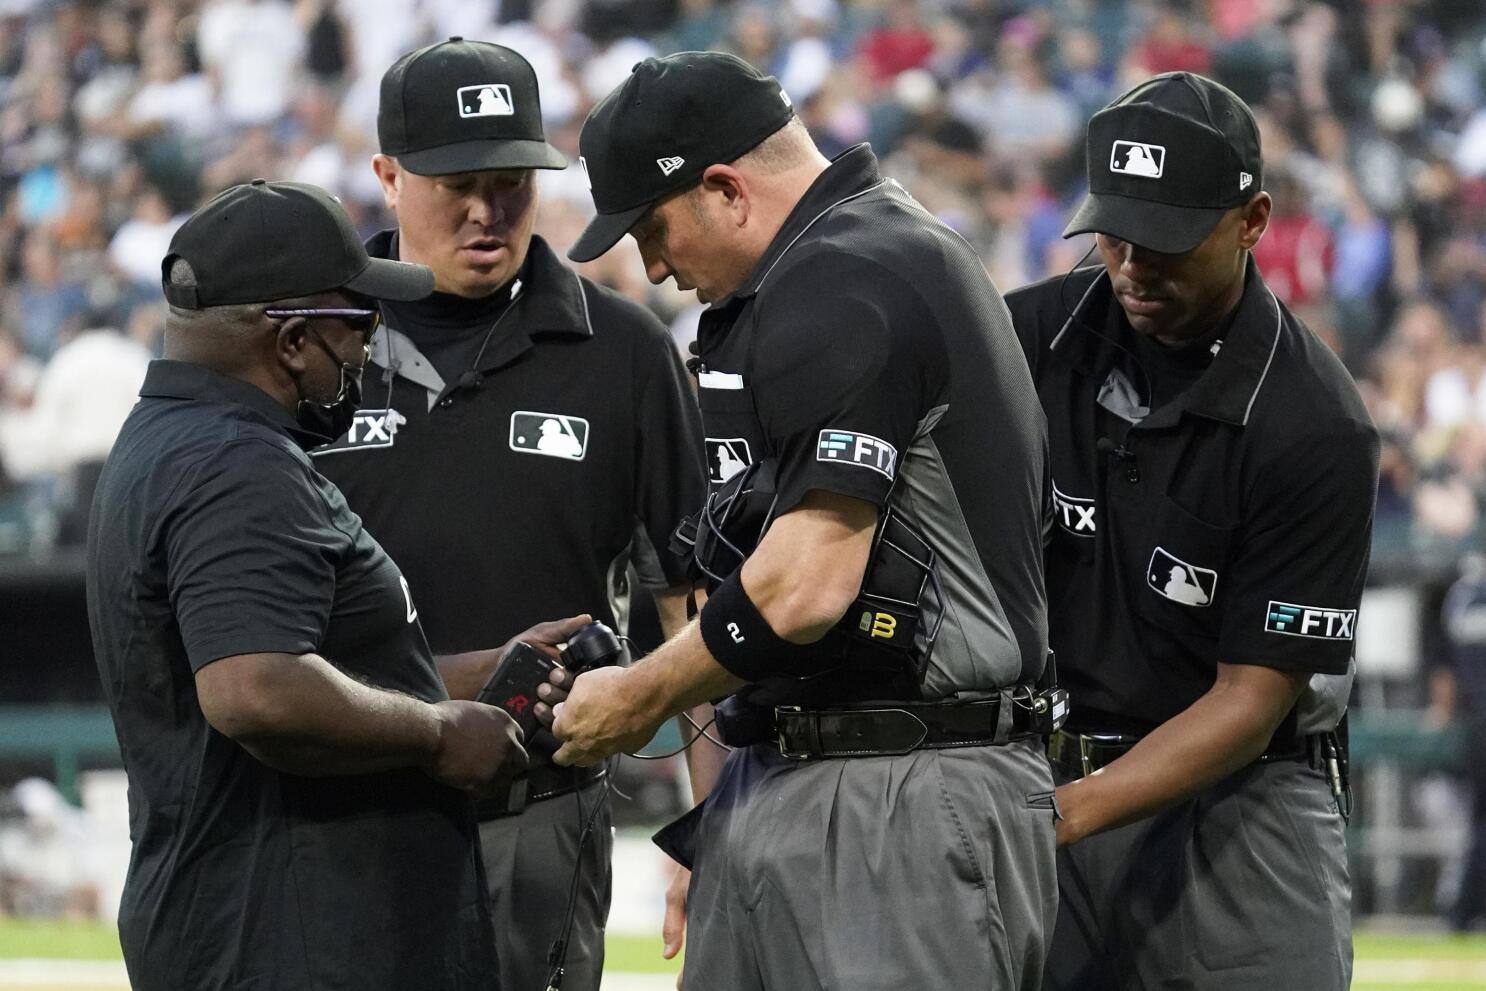 Half of MLB video review challenges led to overturned calls